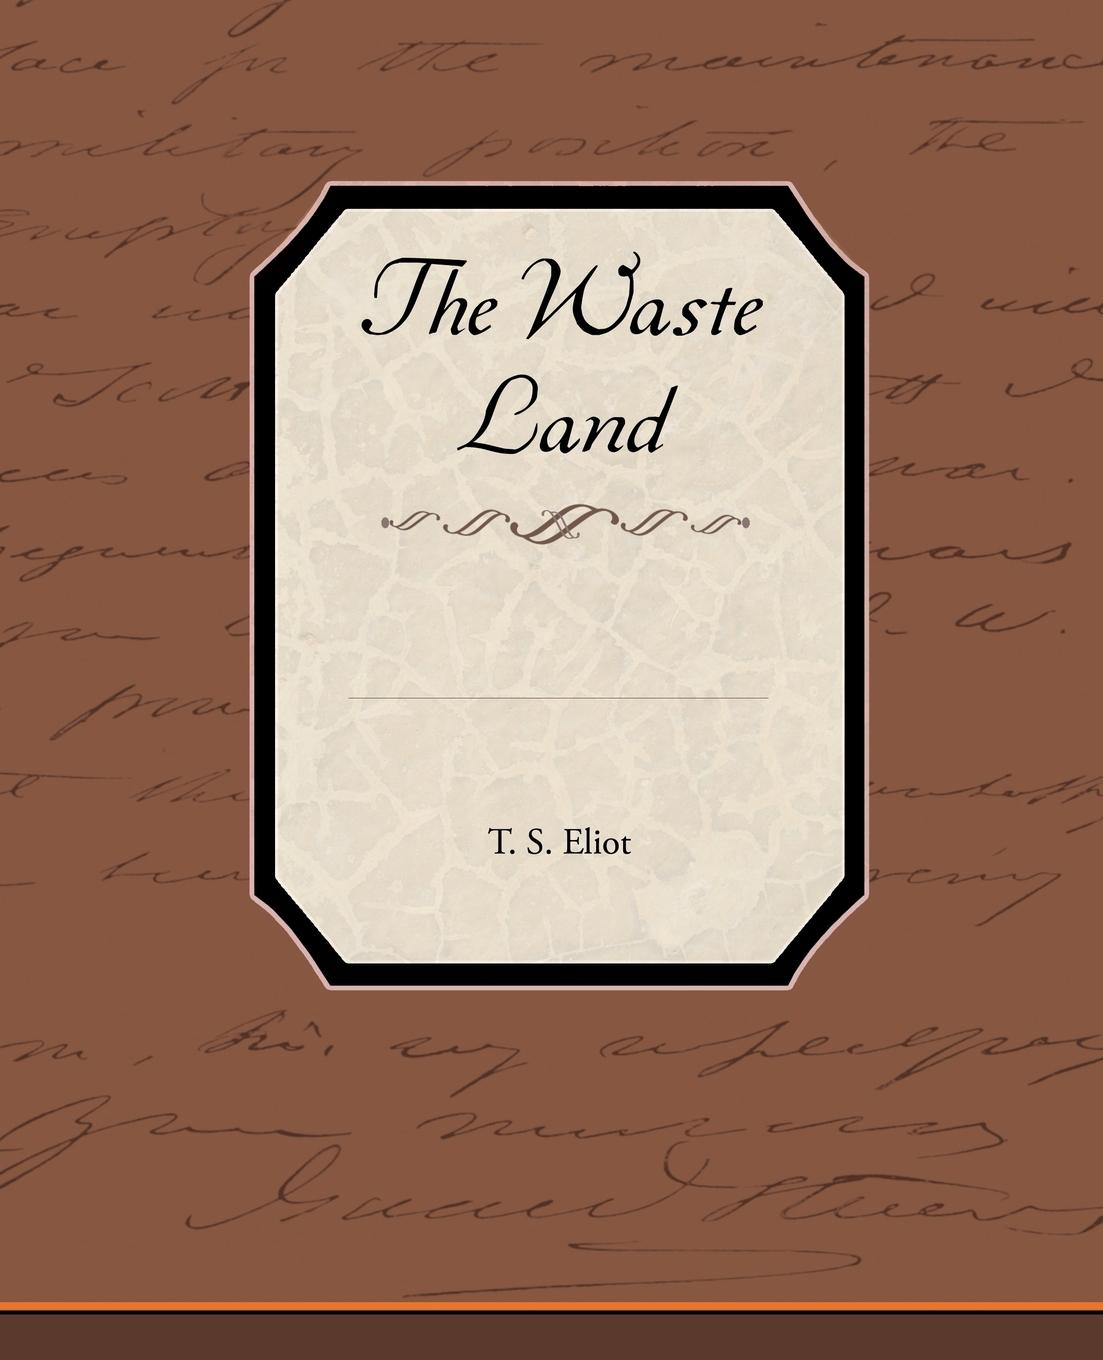 The Waste Land - Eliot, T. S.